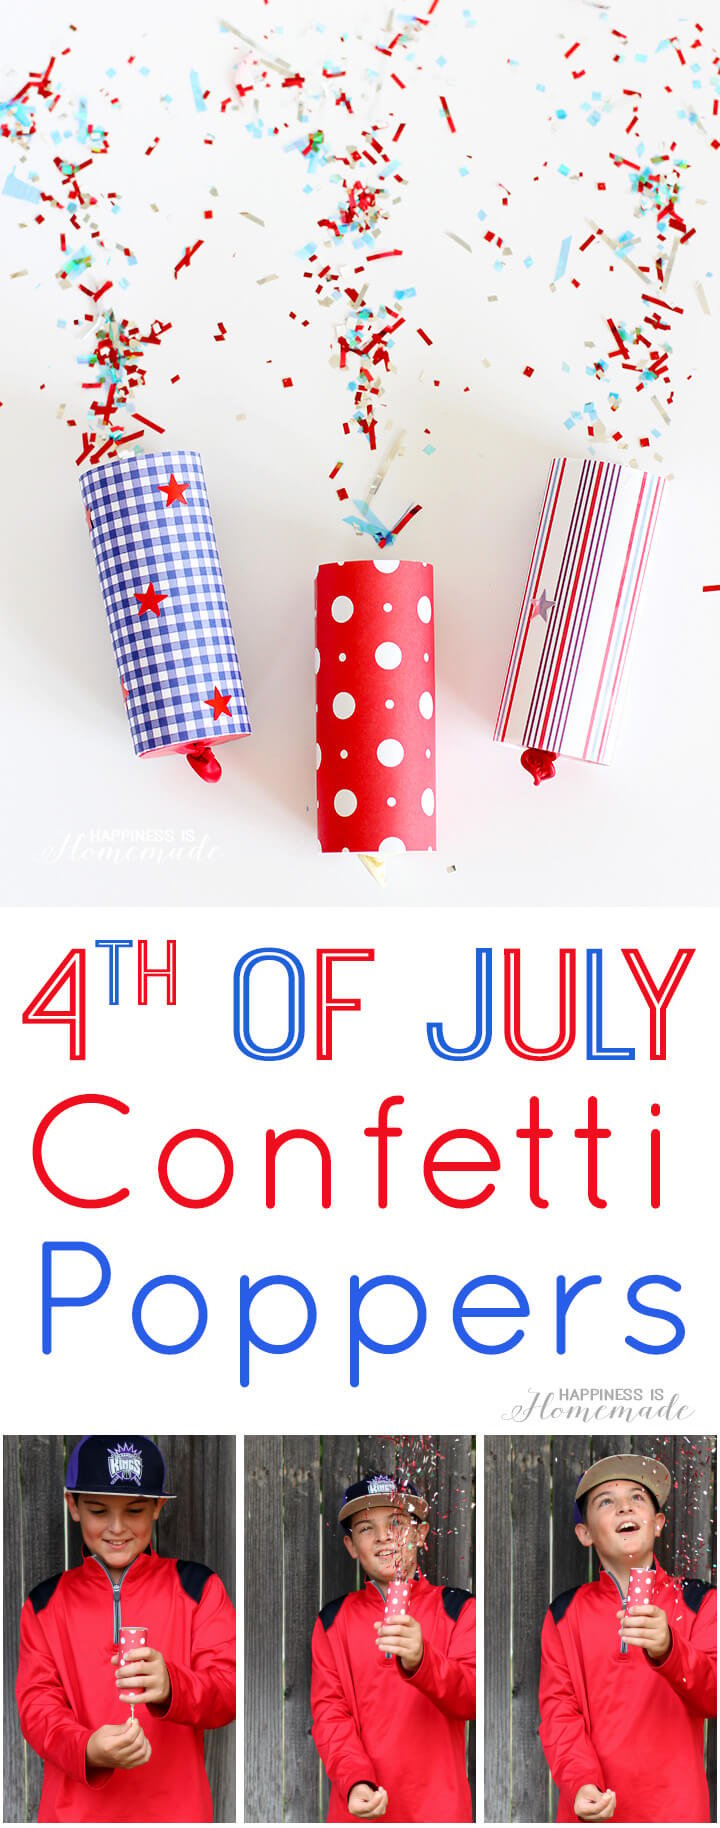 How to Make Confetti Poppers for 4th of July